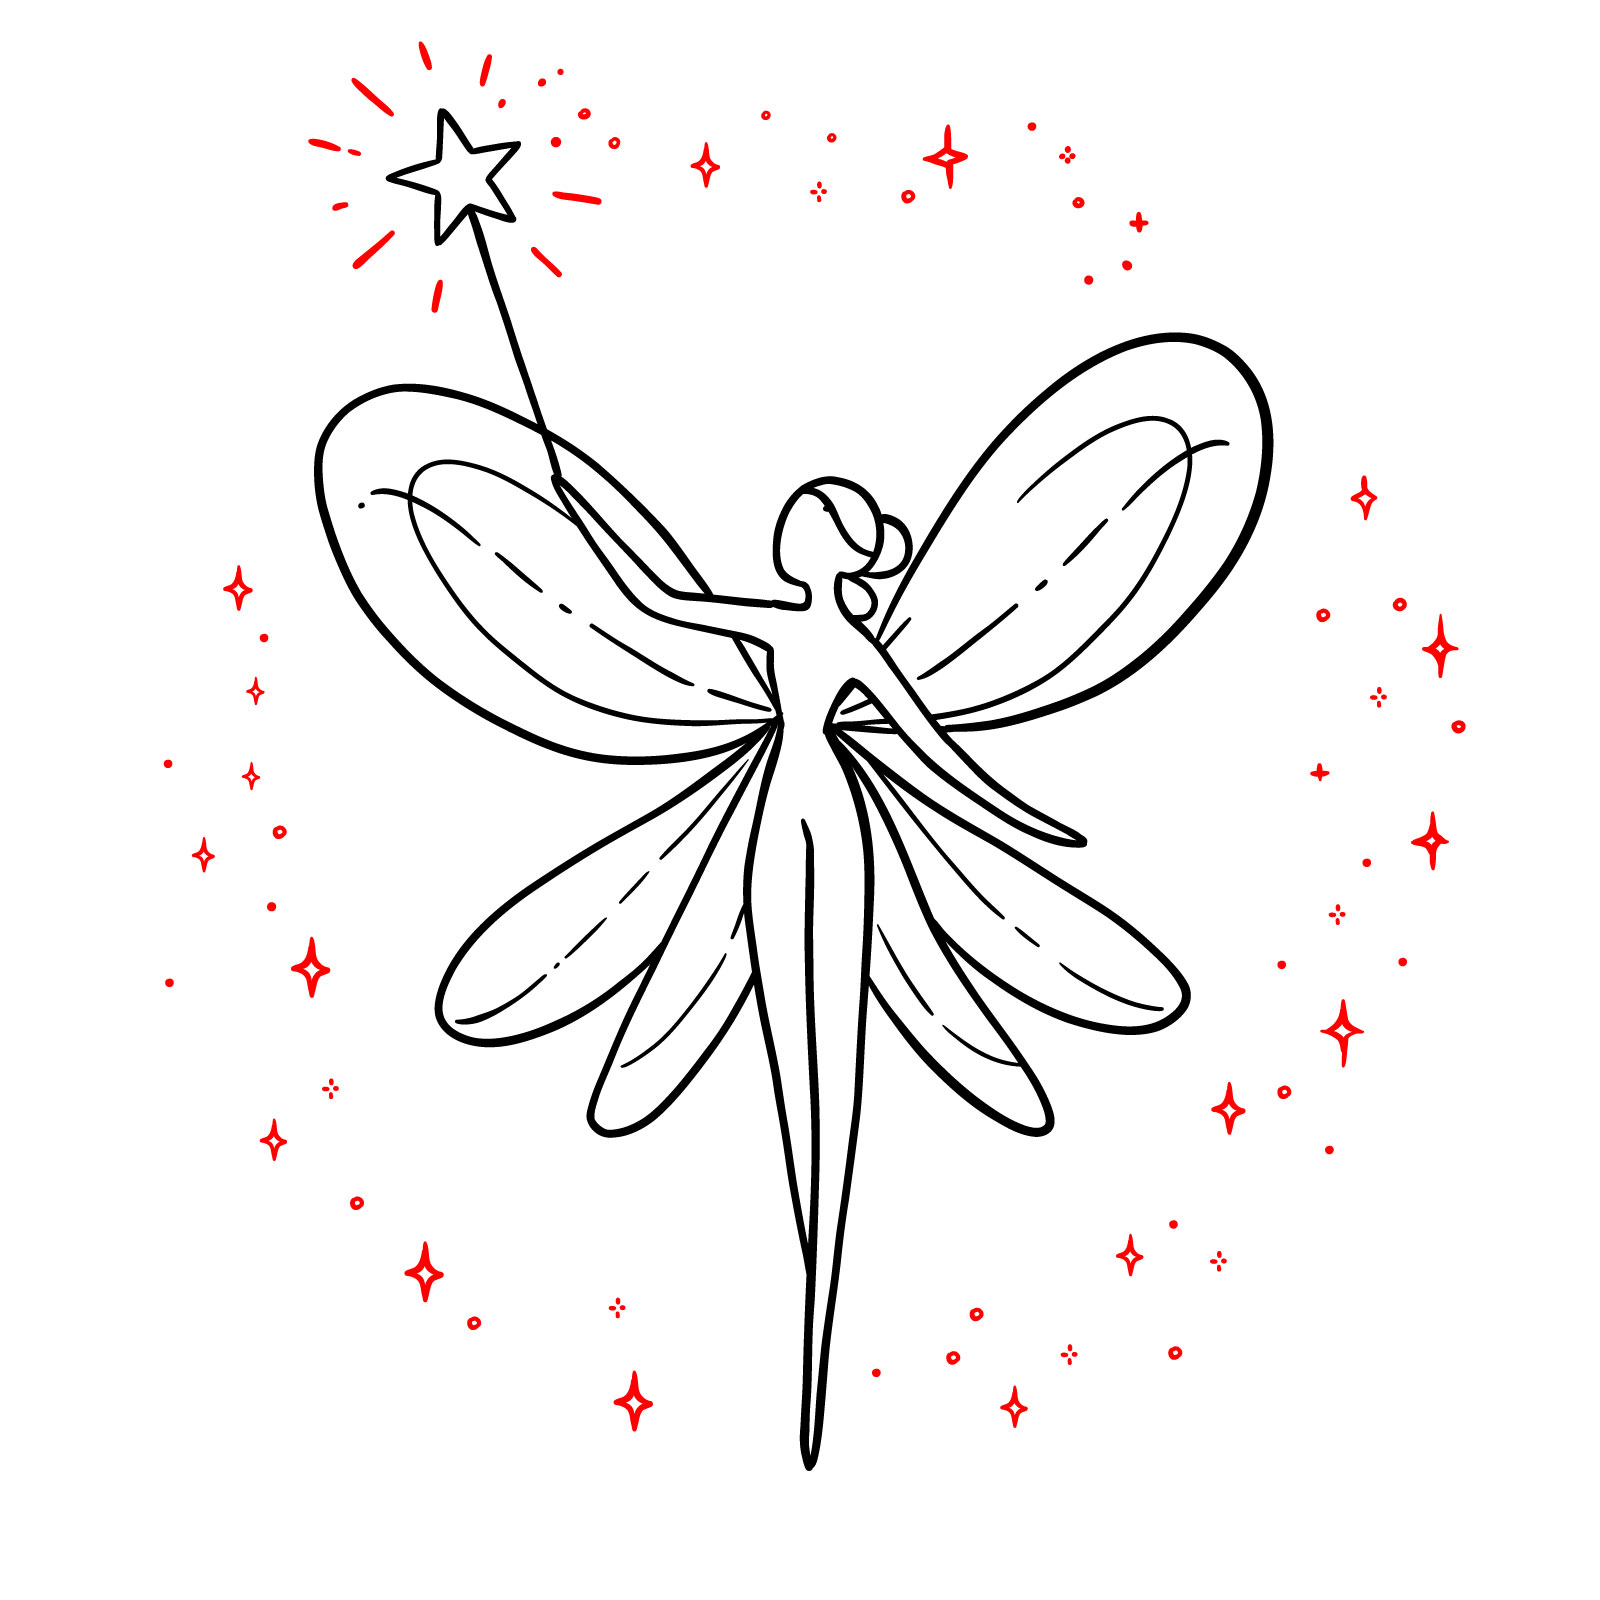 Illustration of magical sparkles around the fairy in our 'How to draw a simple fairy' guide 